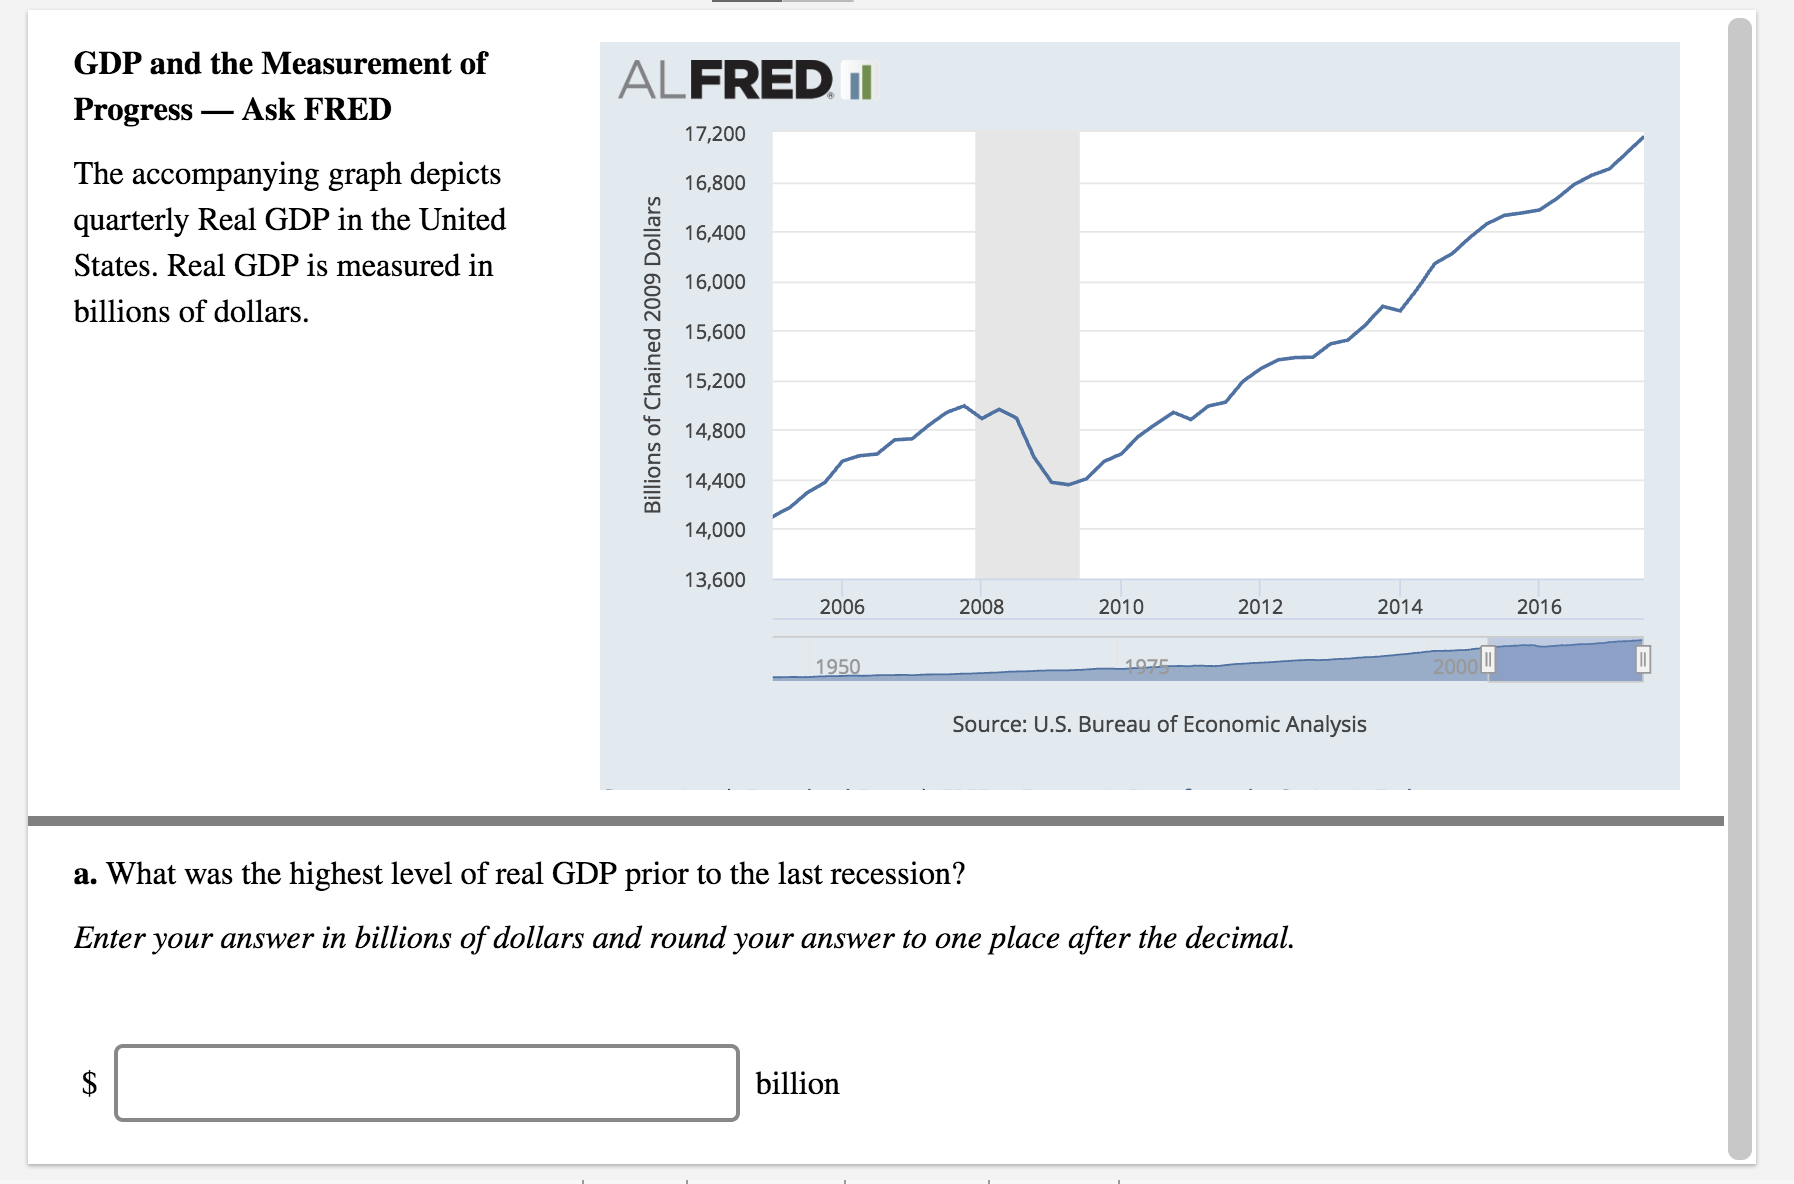 GDP and the Measurement of
Progress _ Ask FRED
The accompanying graph depicts
quarterly Real GDP in the United
States. Real GDP is measured irn
billions of dollars.
ALFRED I
17,200
16,800
O 16,400
16,000
o 15,600
15,200
6 14,800
14,400
14,000
13,600
2006
2008
2010
2012
2014
2016
Source: U.S. Bureau of Economic Analysis
a. What was the highest level of real GDP prior to the last recession?
Enter your answer in billions of dollars and round your answer to one place after the decimal.
billion
